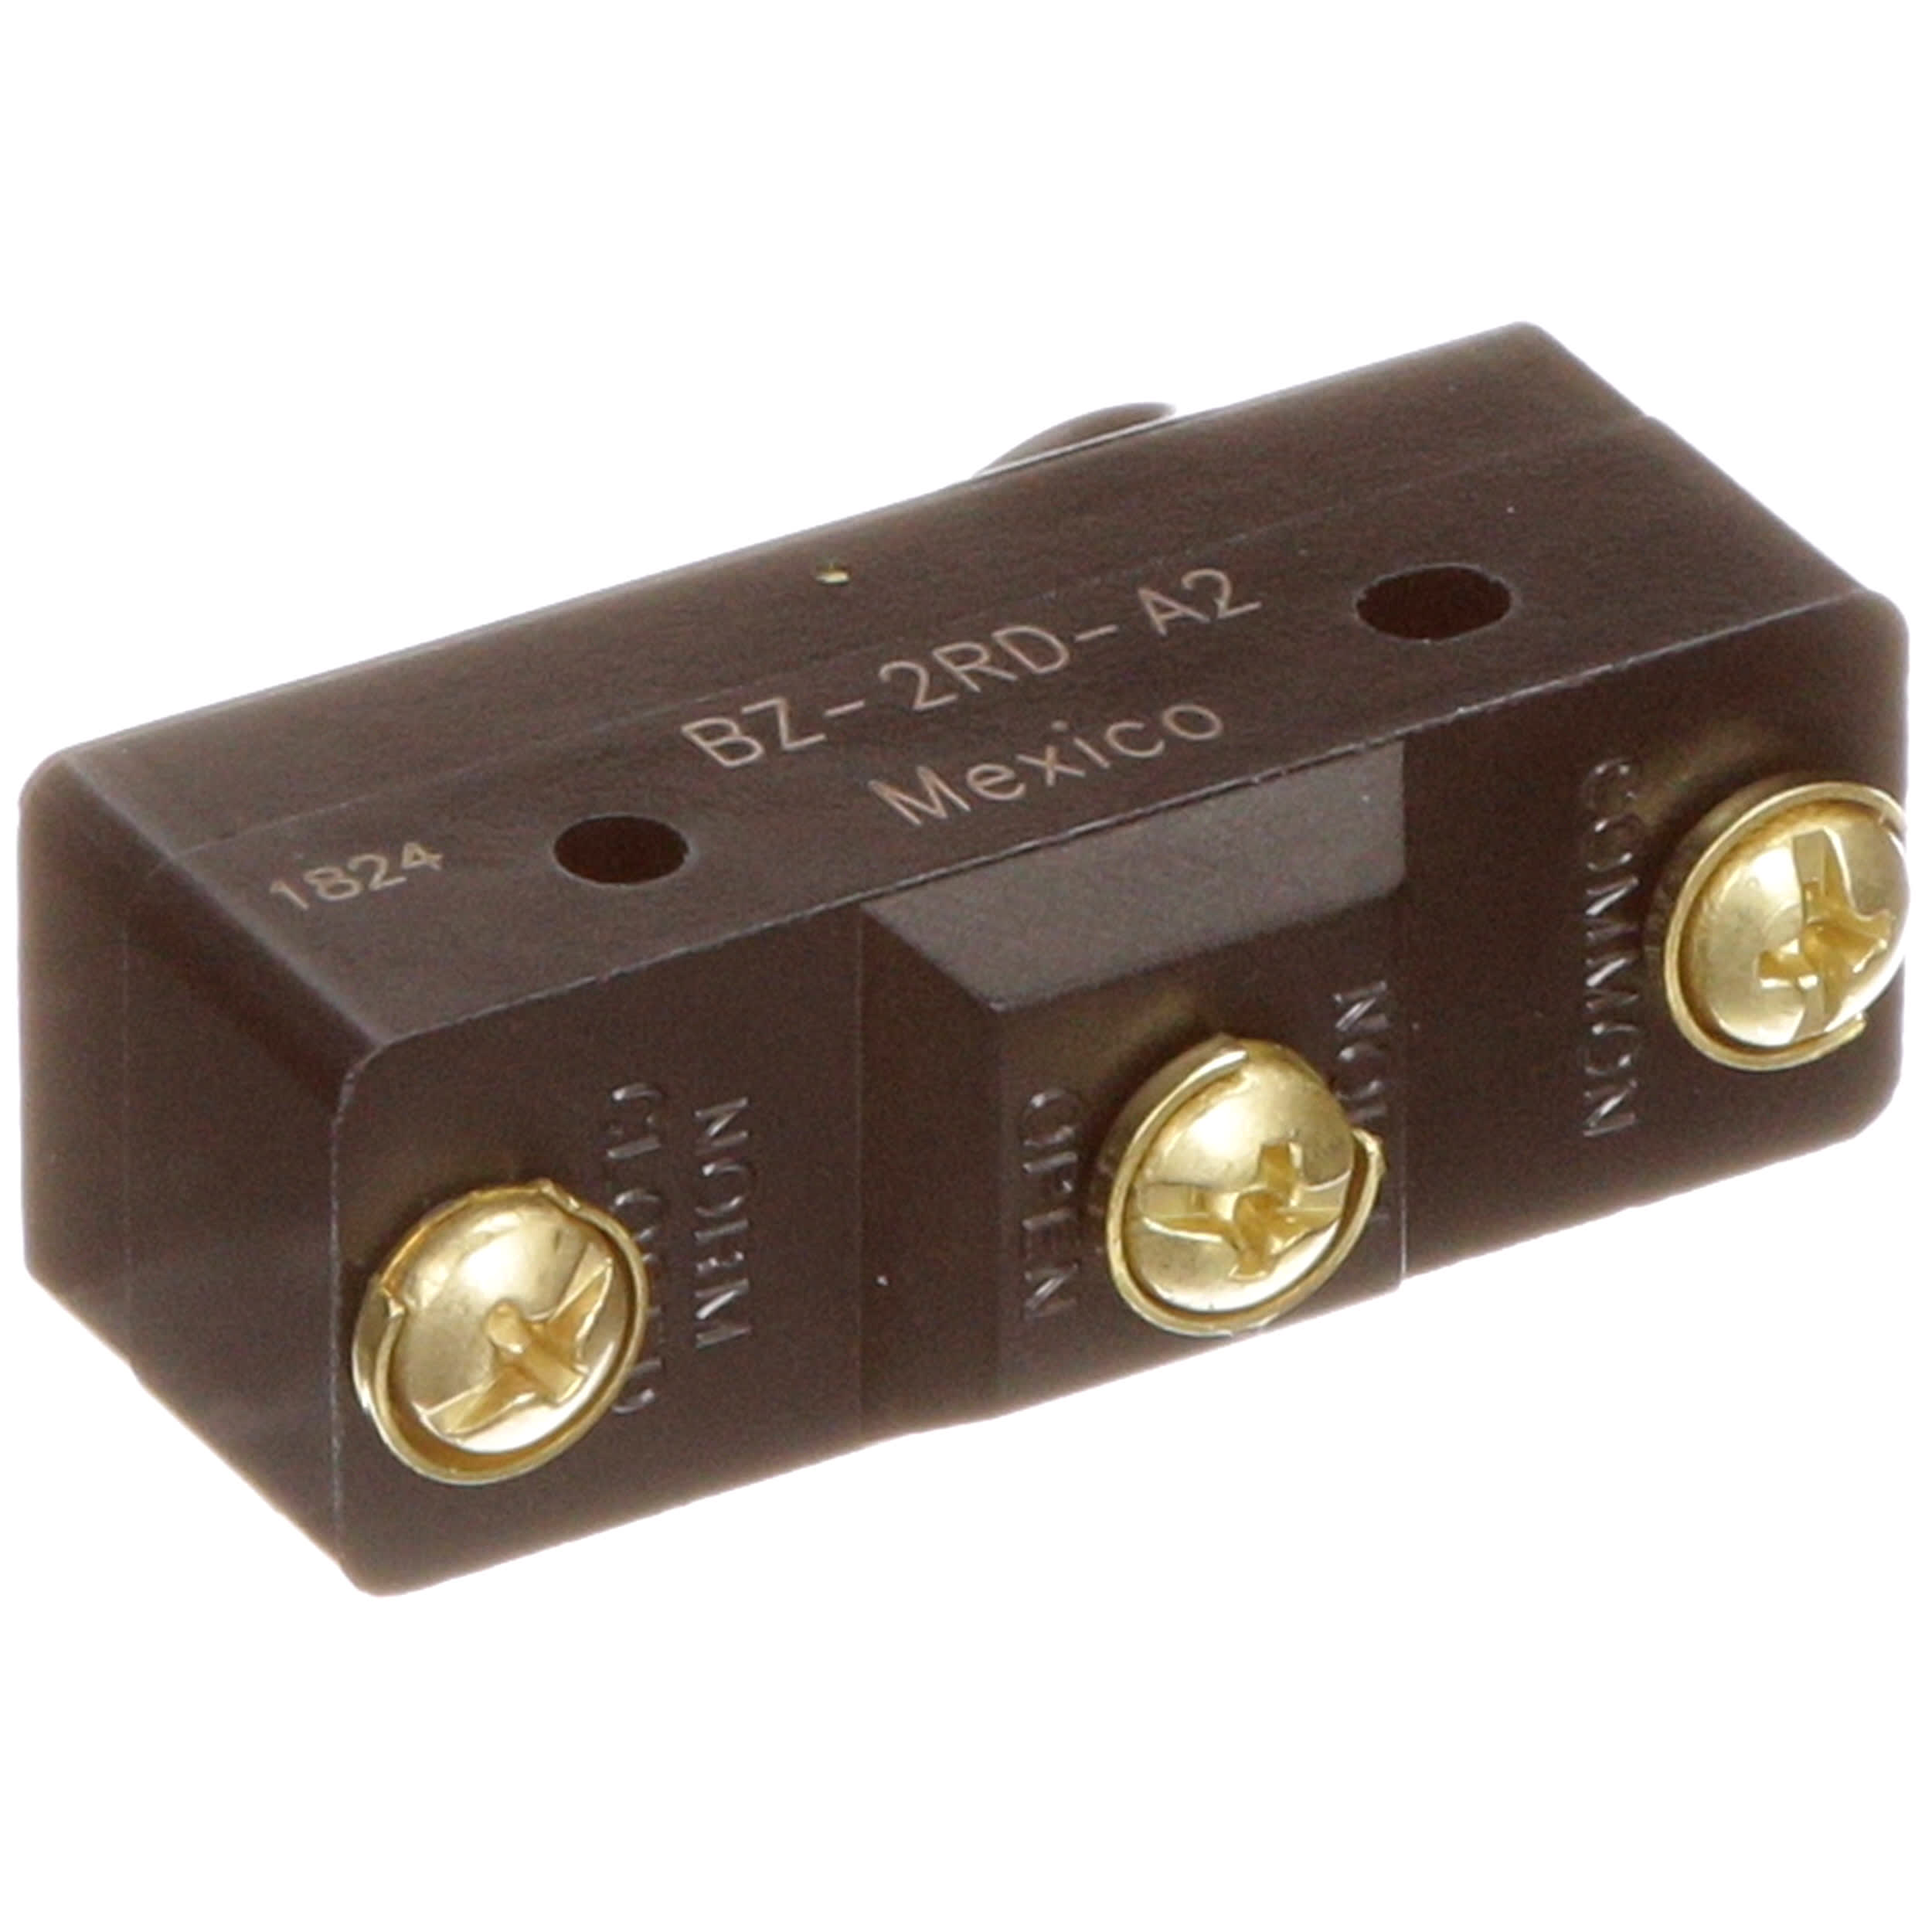 Honeywell Controls Micro Switch BZ-RL2 Ships the Same Day of the Purchase 